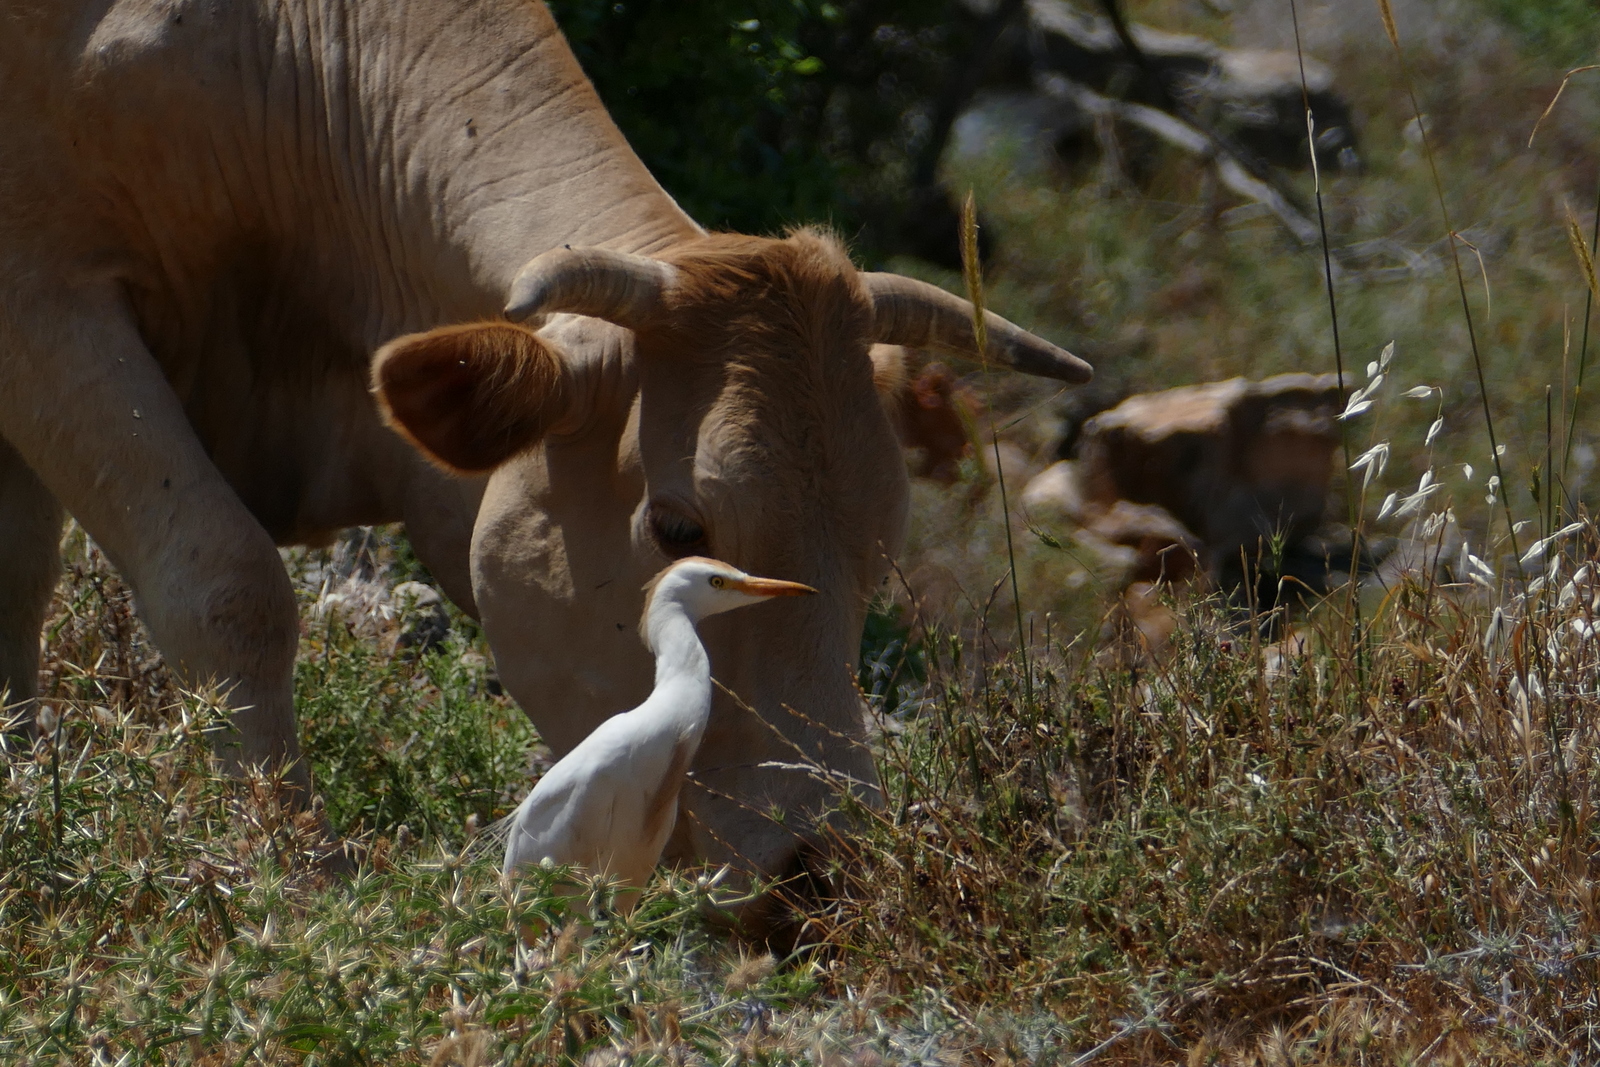 Cattle Egret Foraging next to a cow in Lower Galillee May 2017